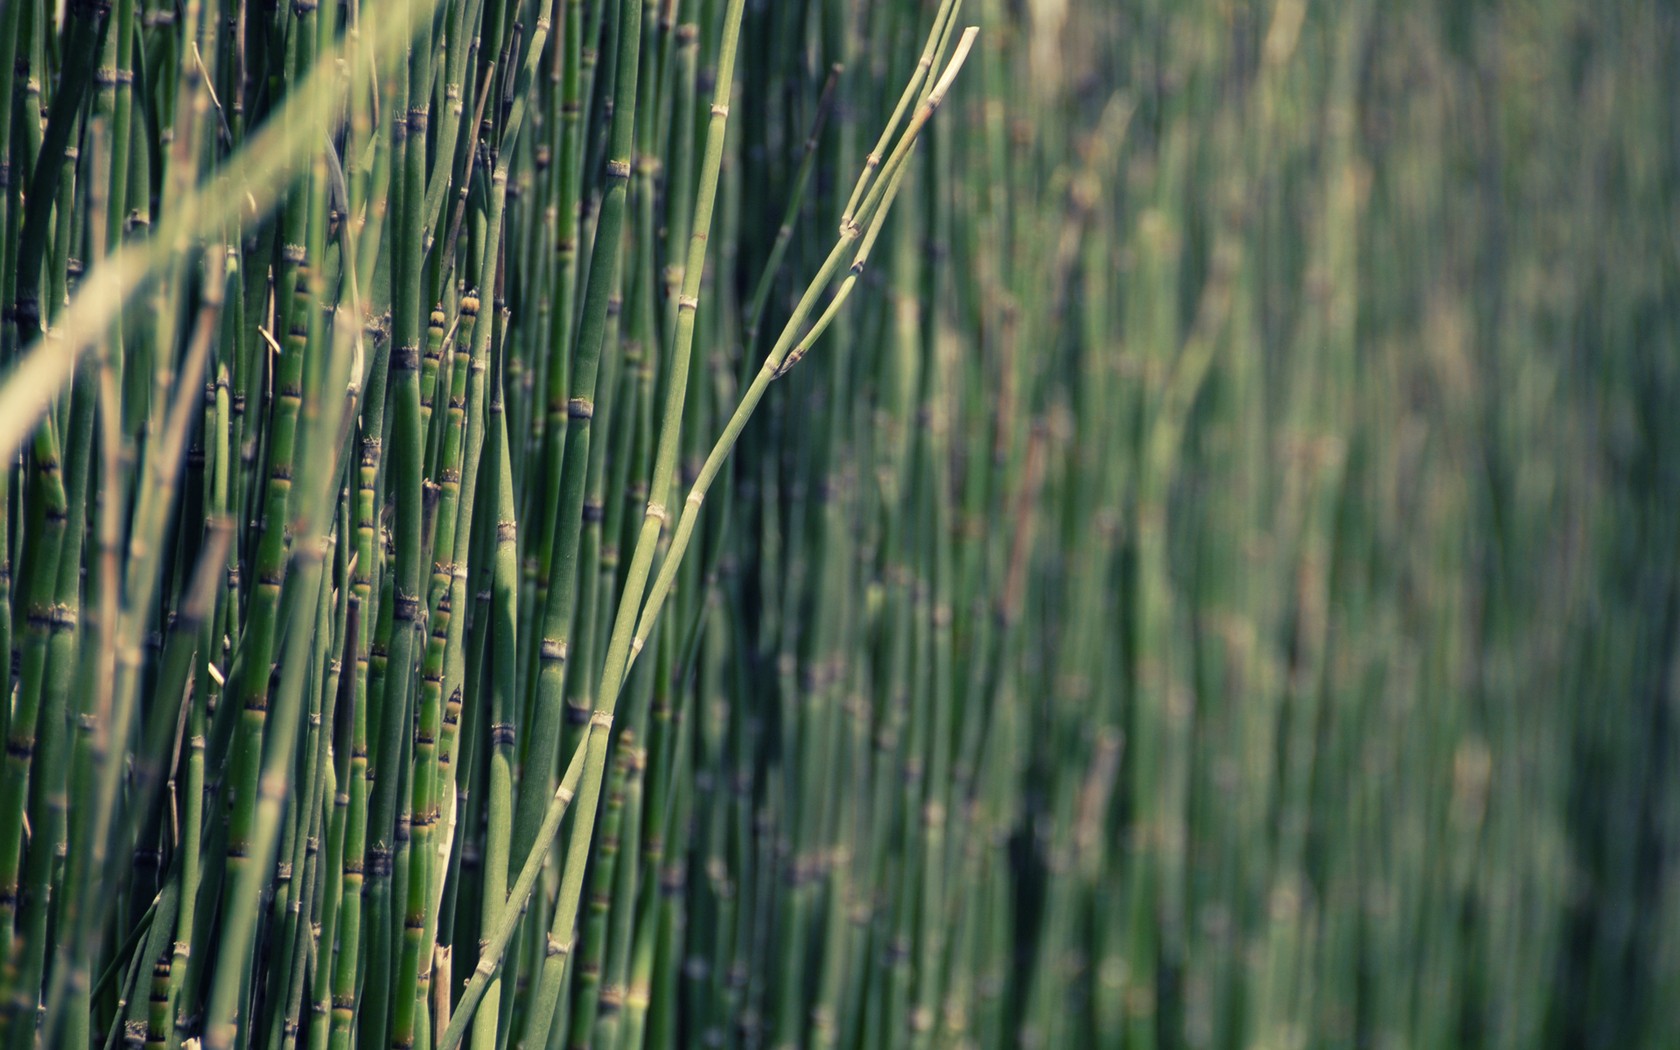 General 1680x1050 nature bamboo plants